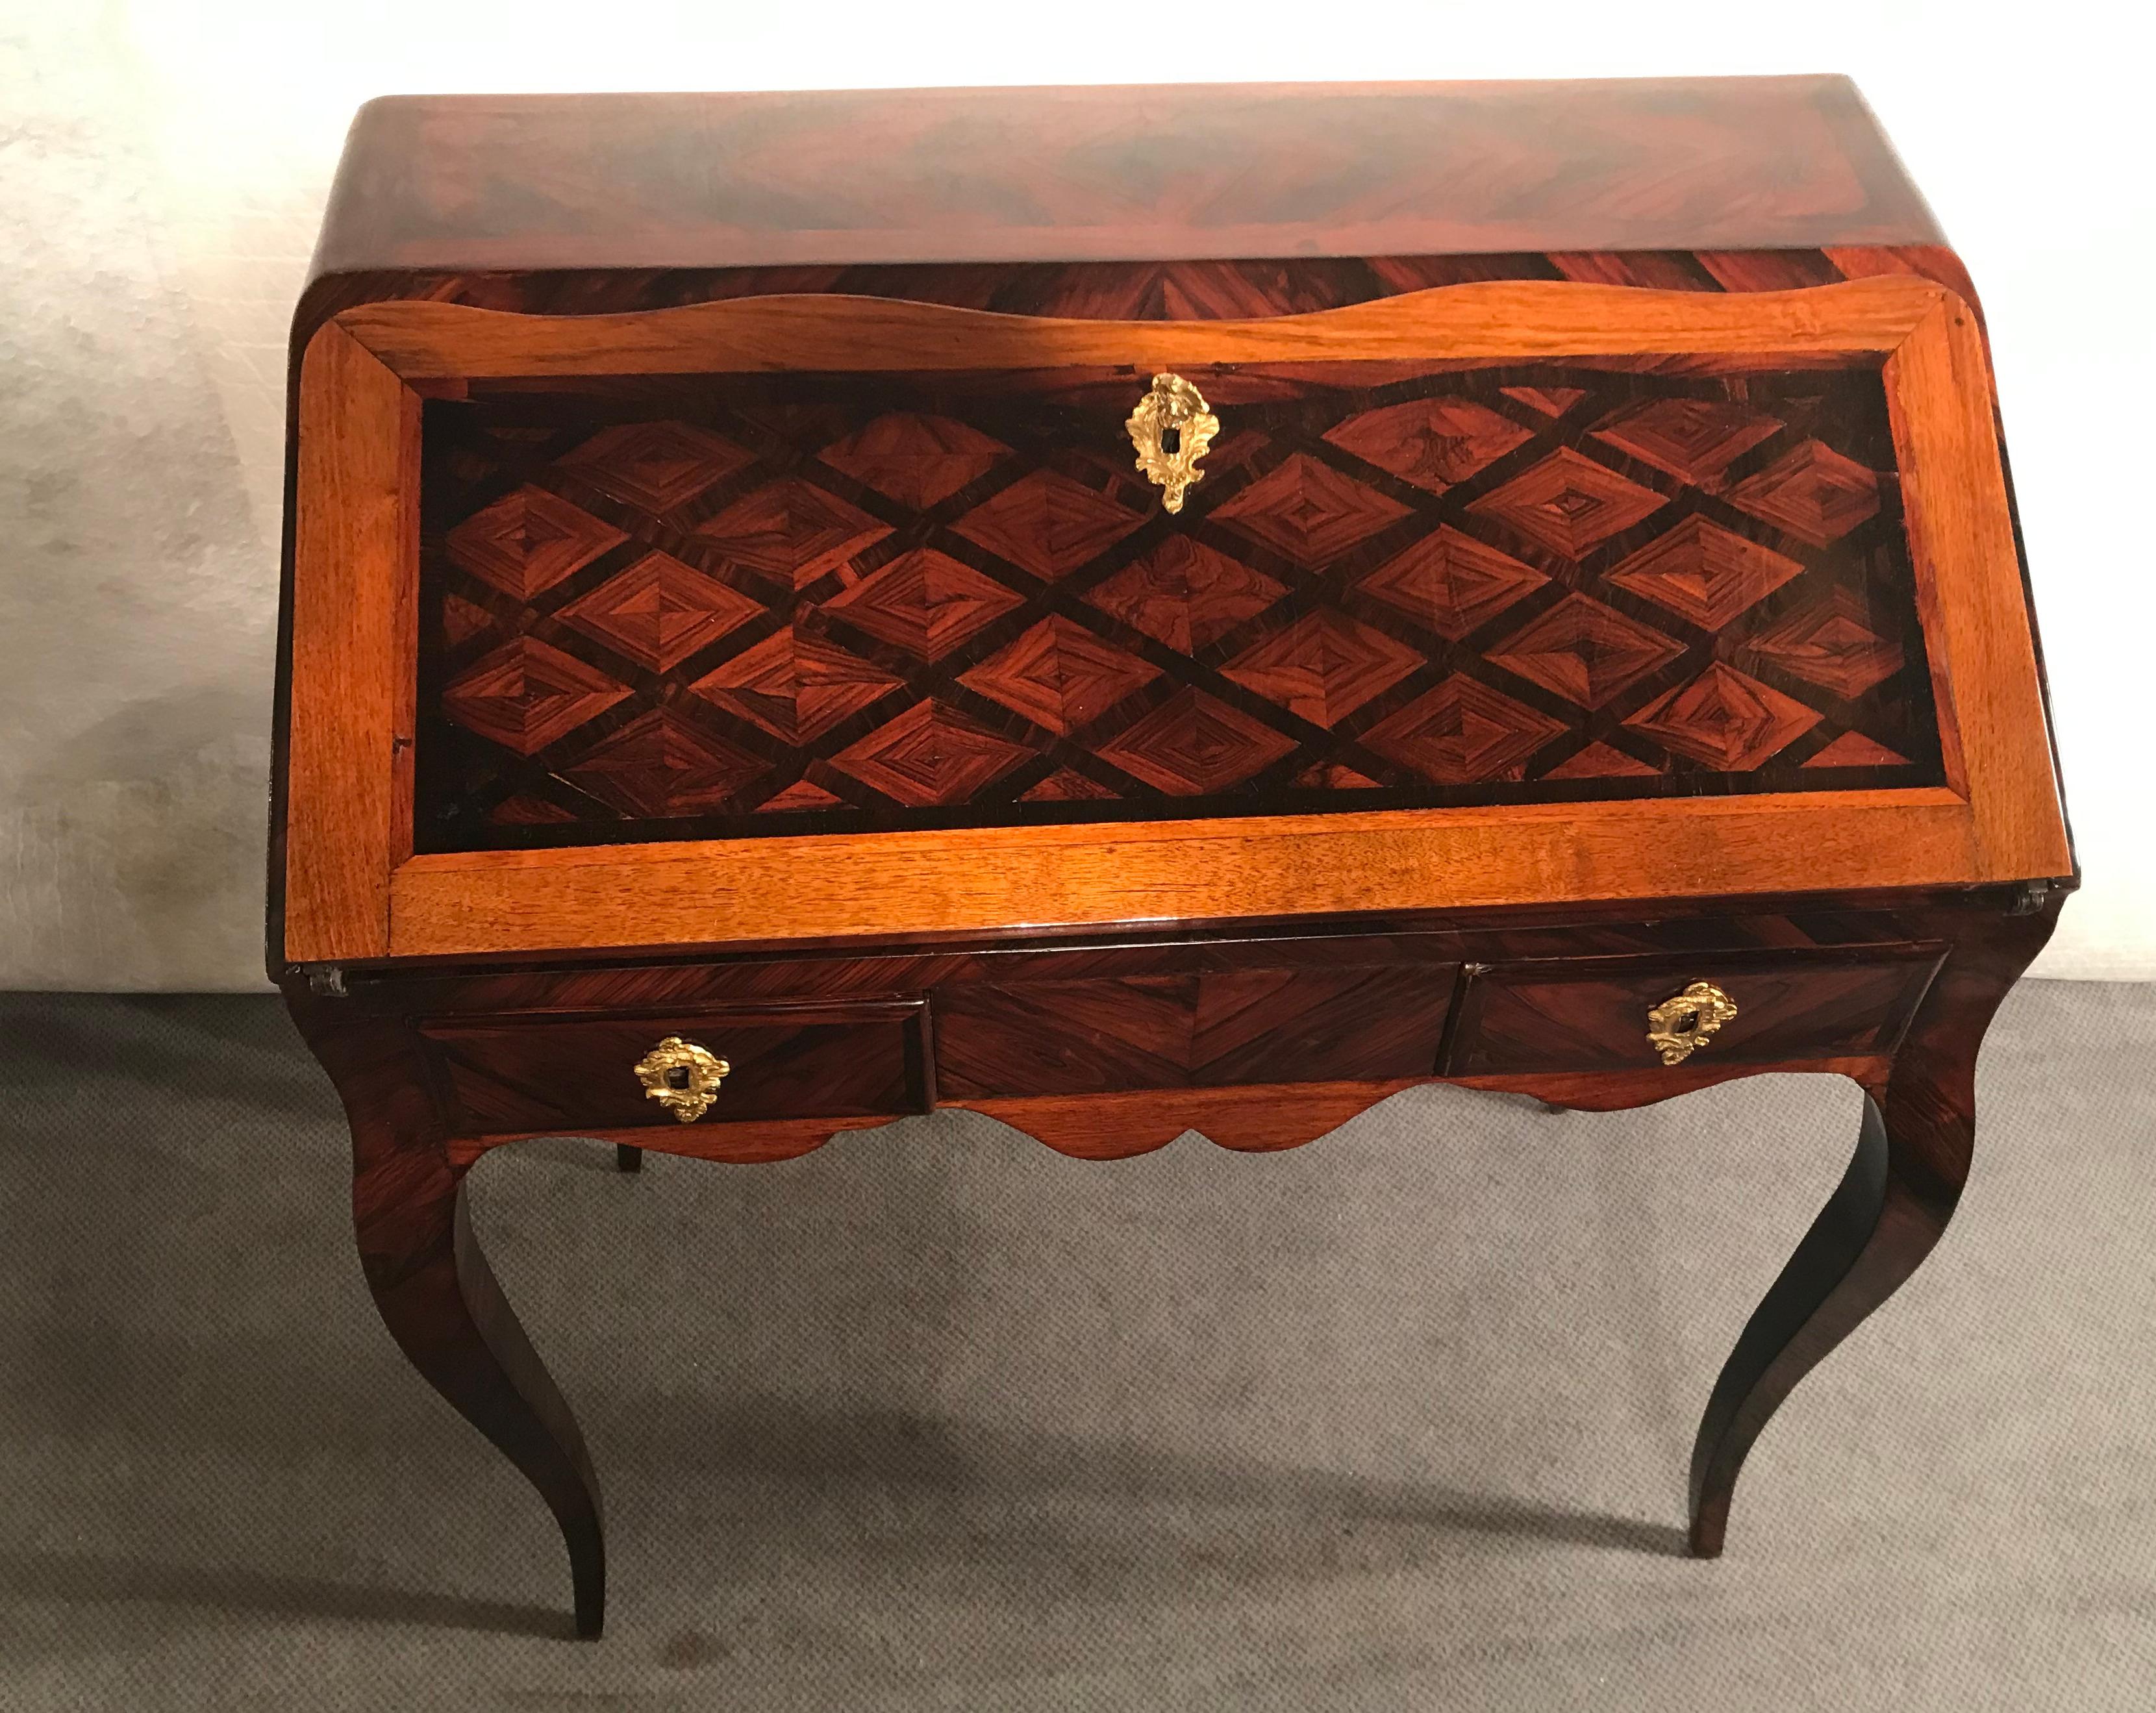 This gorgeous Louis XV Secretary desk dates back to around 1750-60 and was made in France. The secretaire de dame has a kingwood veneer and a very pretty marquetry with a diamond shape decor on the outside of the writing flap. The writing surface is